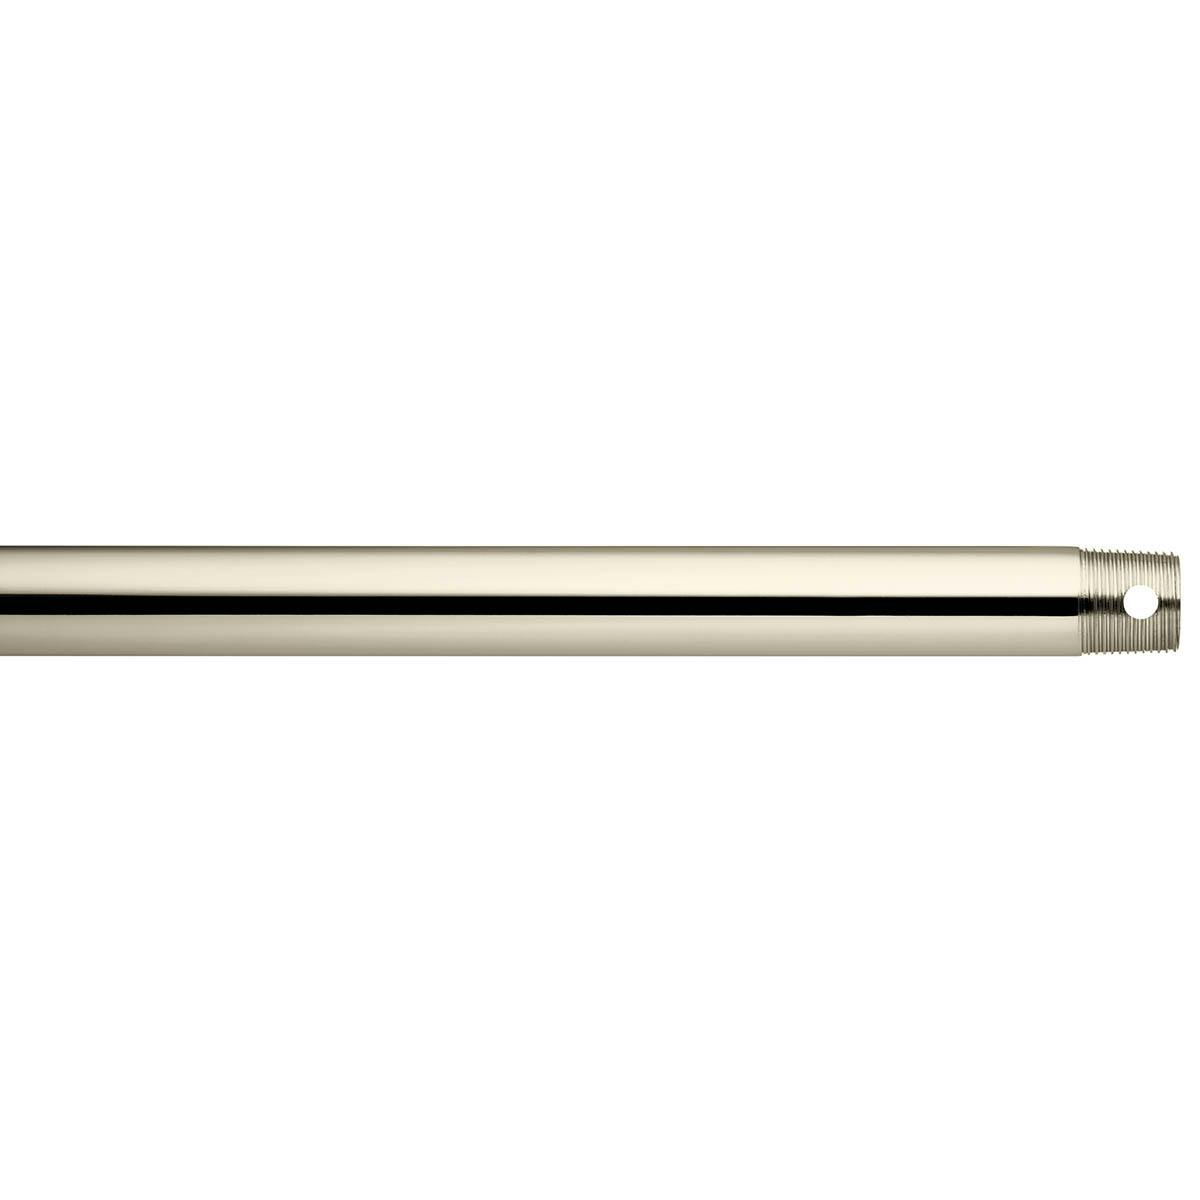 Dual Threaded 72" Downrod Polished Nickel on a white background